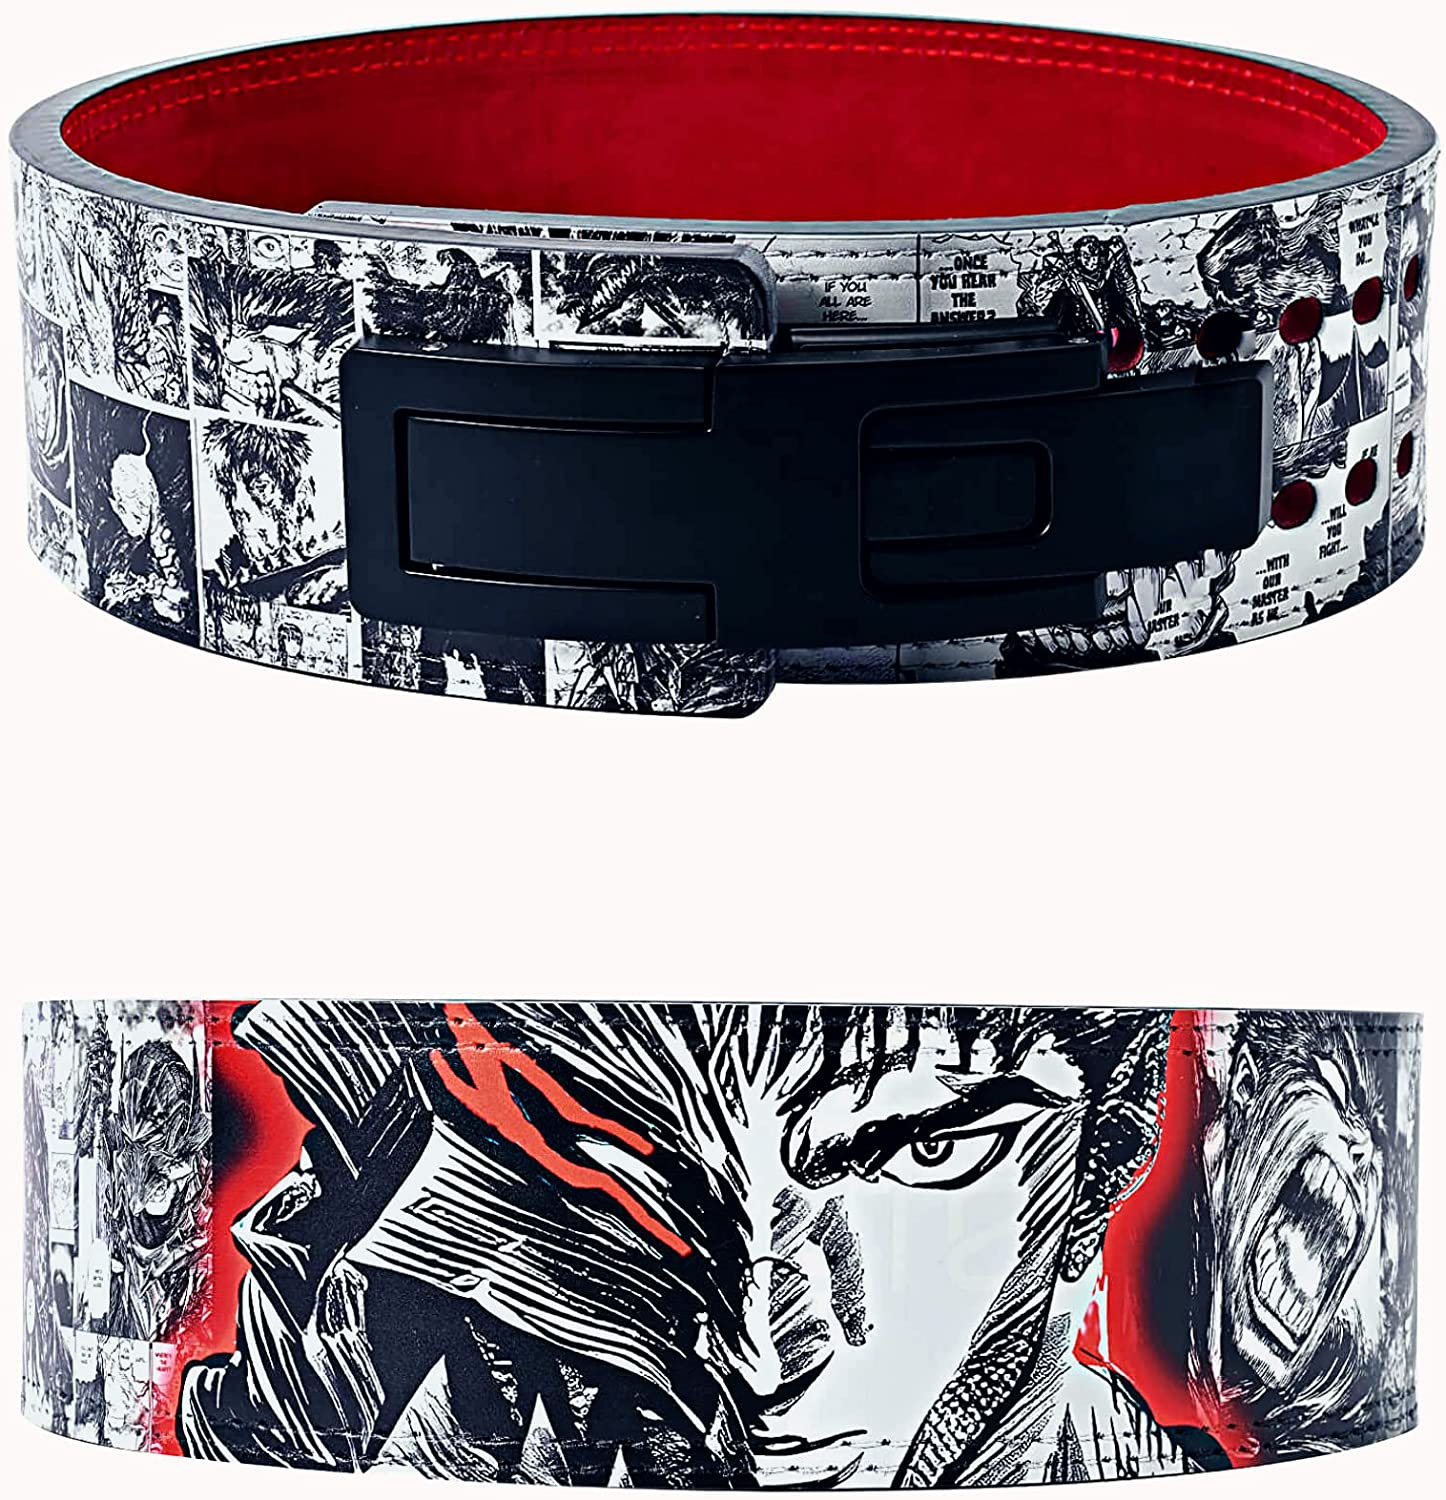 Anime Lever Belt, Ttan Design B Weight Lifting Belt, Heavy Duty  Powerlifting Belt, Gym Accessories For Men and Women - Weightlifting Gym  Belt for Back Support and Deadlifts Squats, 10mm Thickness, M -